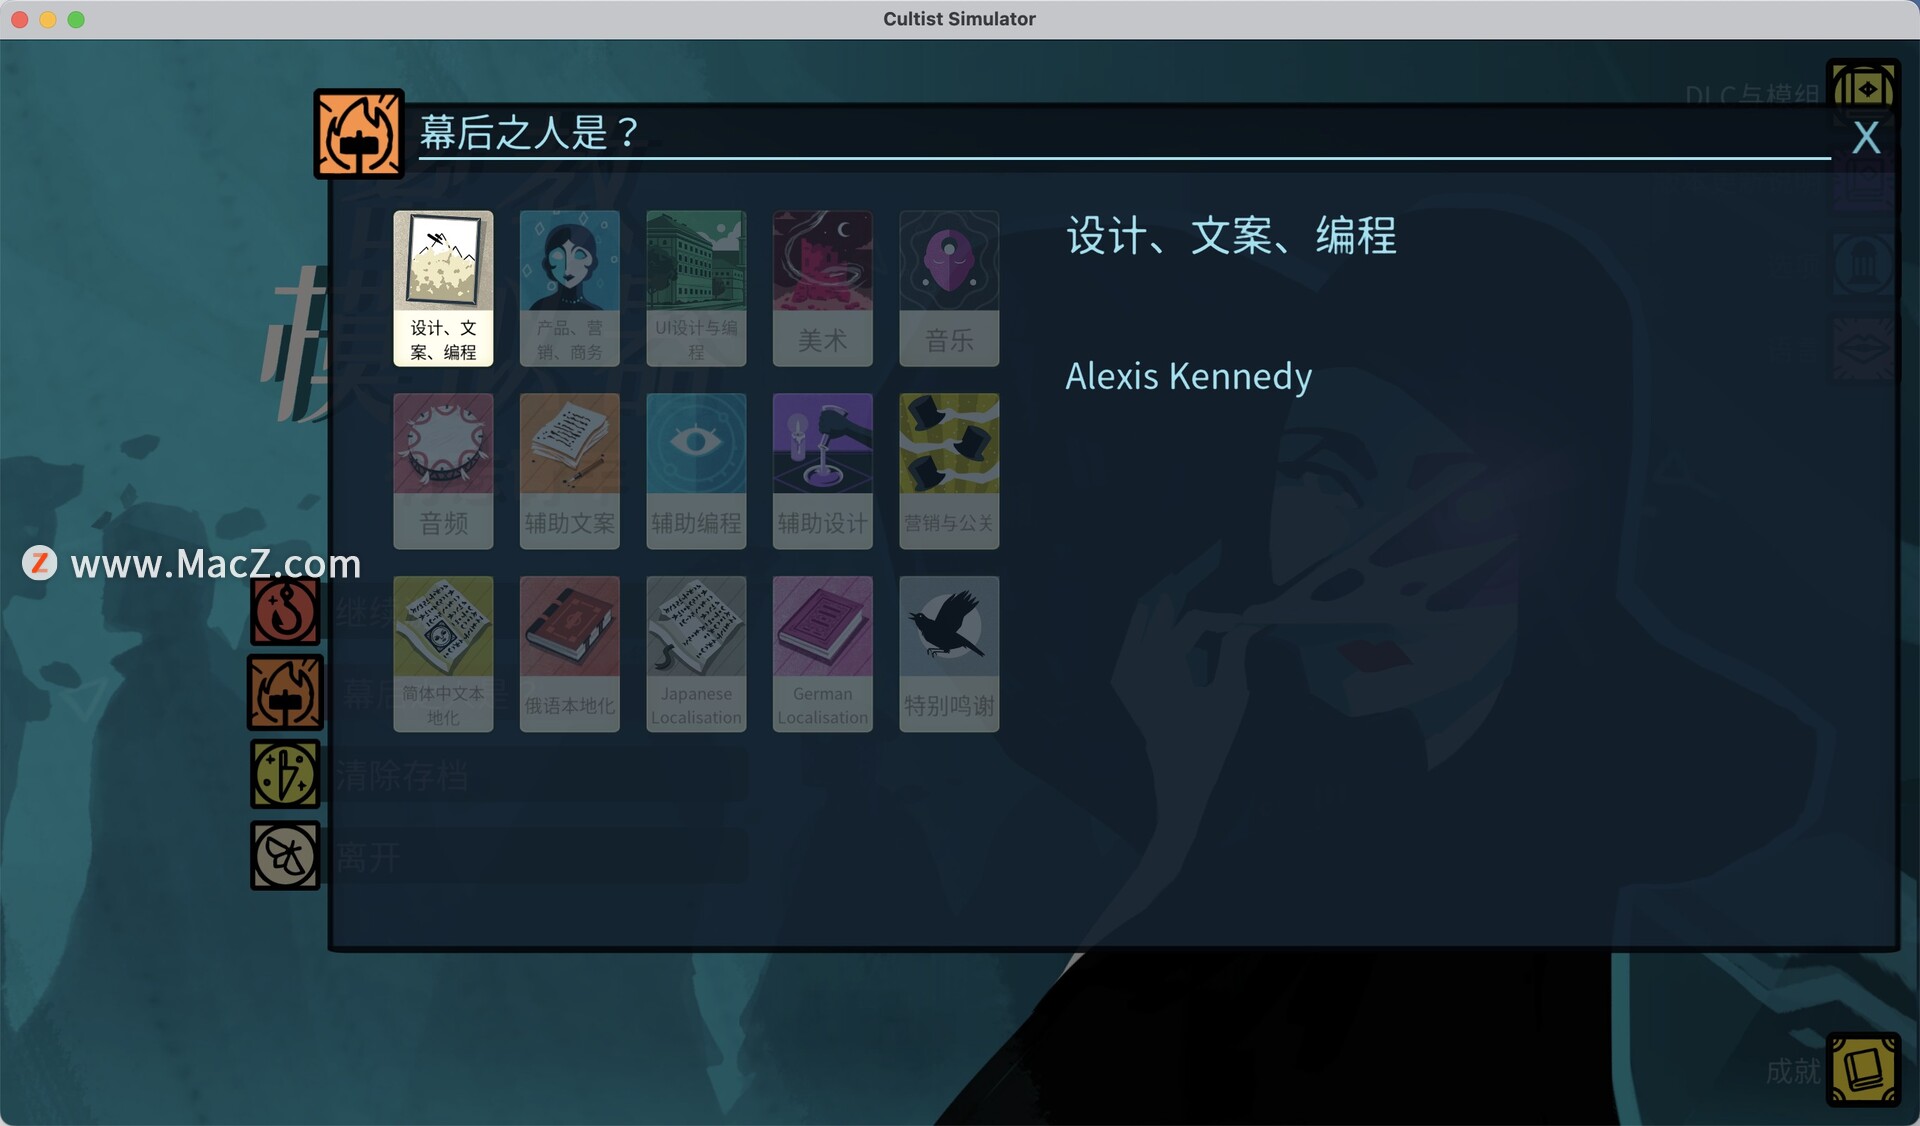 Cultist Simulator for Mac(密教模拟器恐怖冒险游戏)